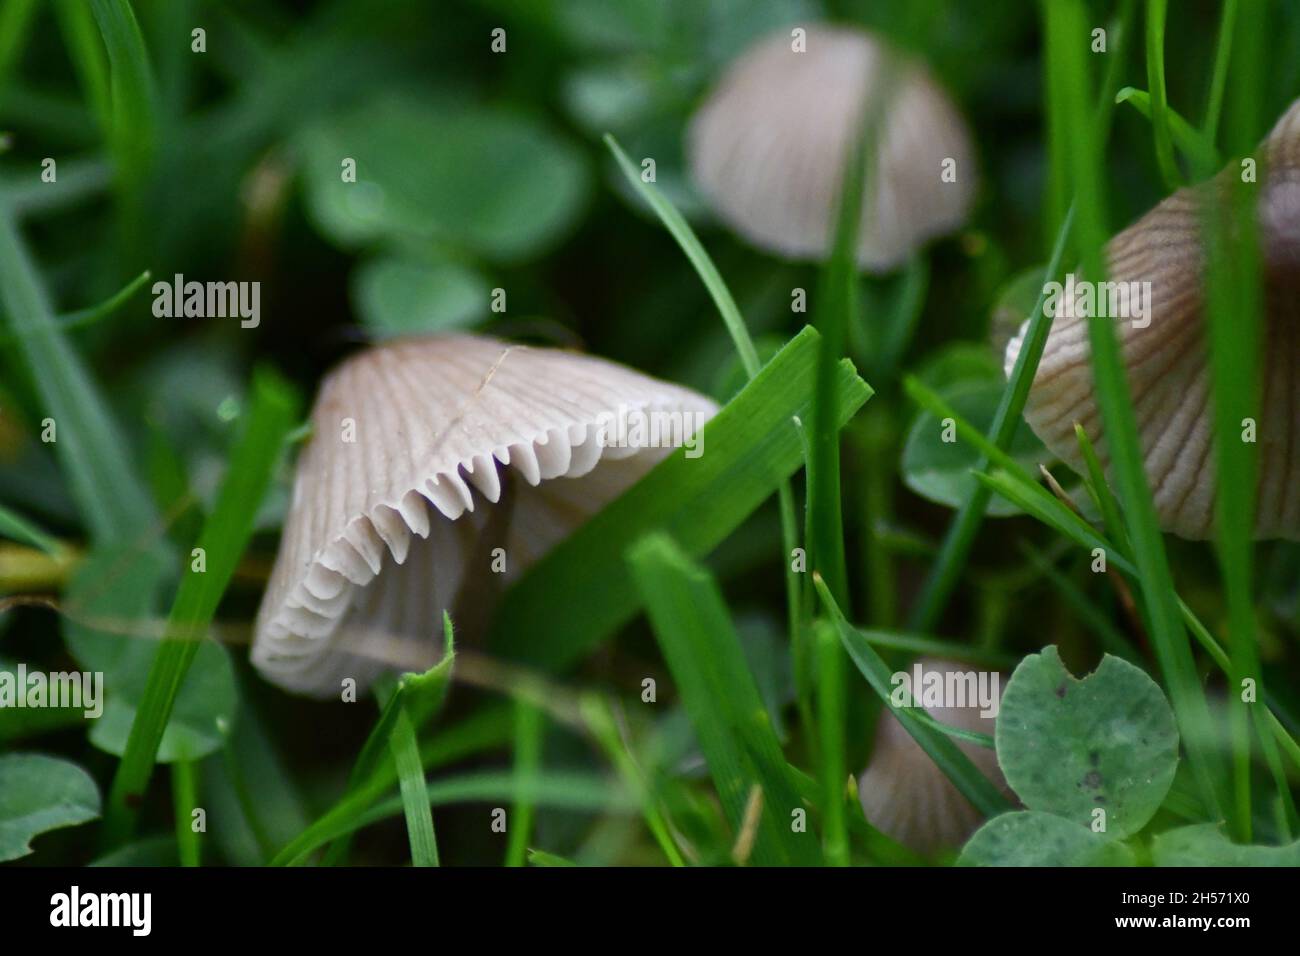 Wild Mushrooms, Fungi in the undergrowth of an English Forest Stock Photo